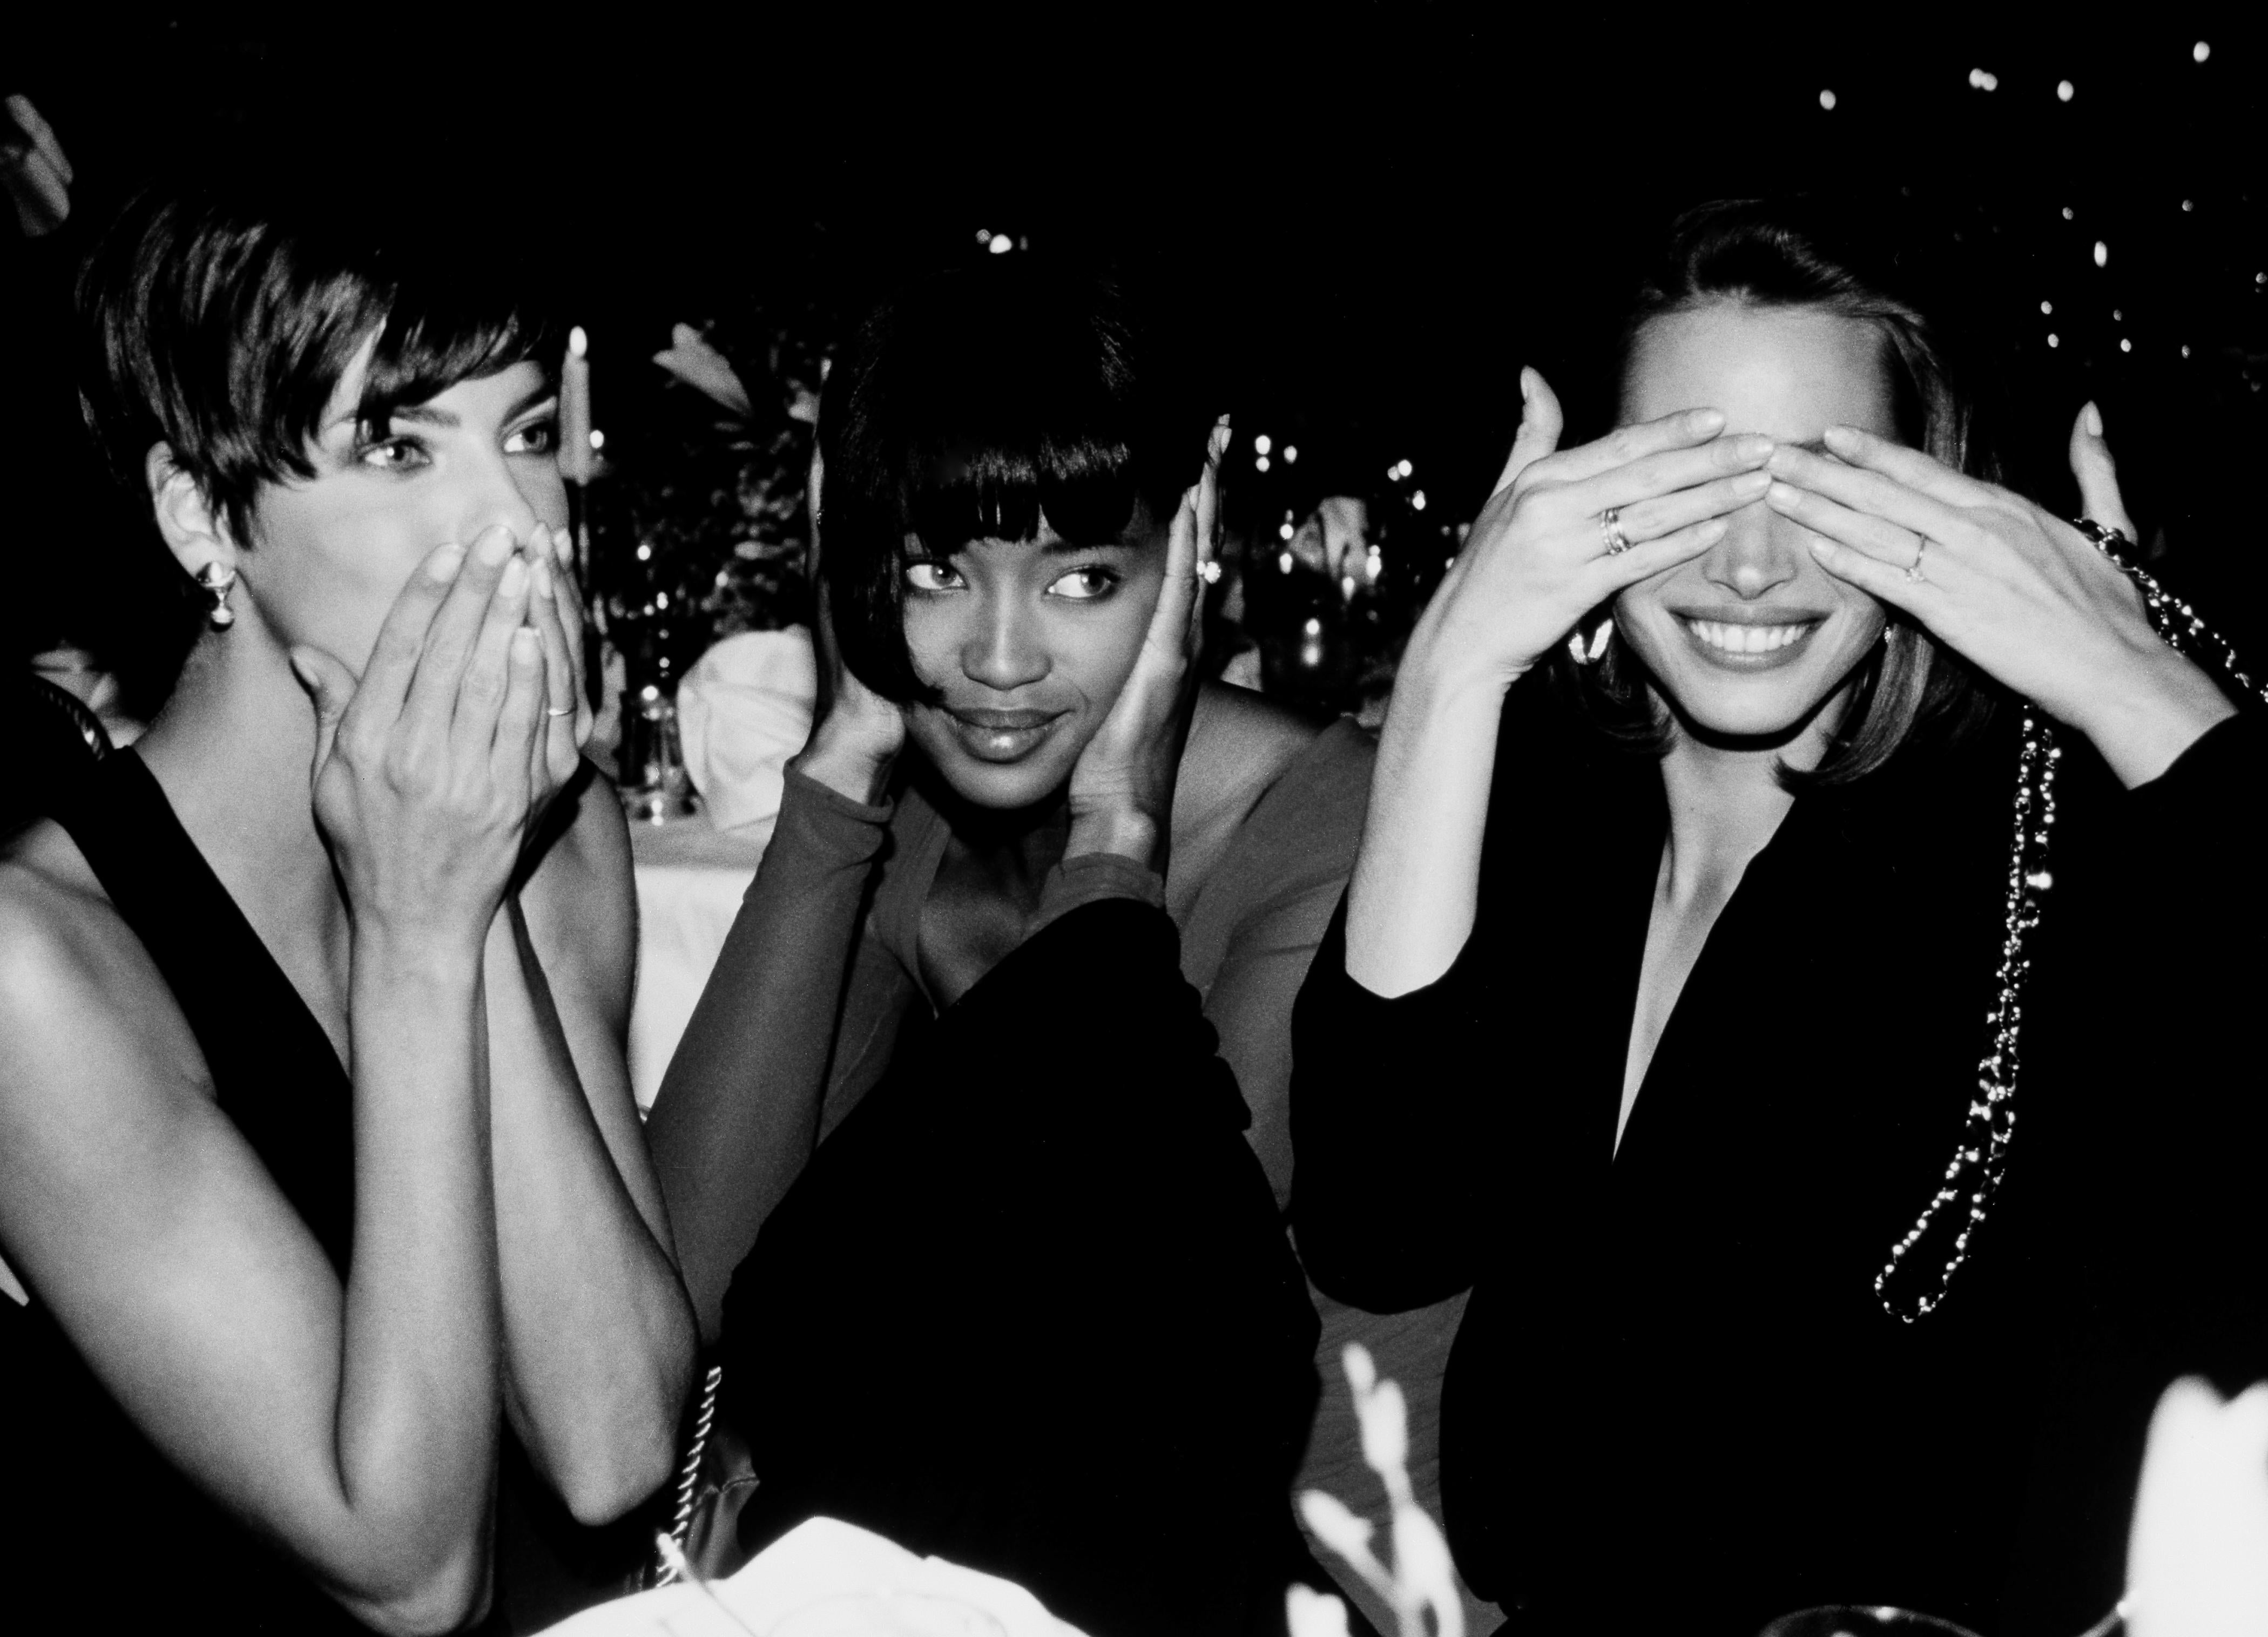 Roxanne Lowit Black and White Photograph - Seeing, Speaking, Hearing no Evil - three supermodels, fine art photography